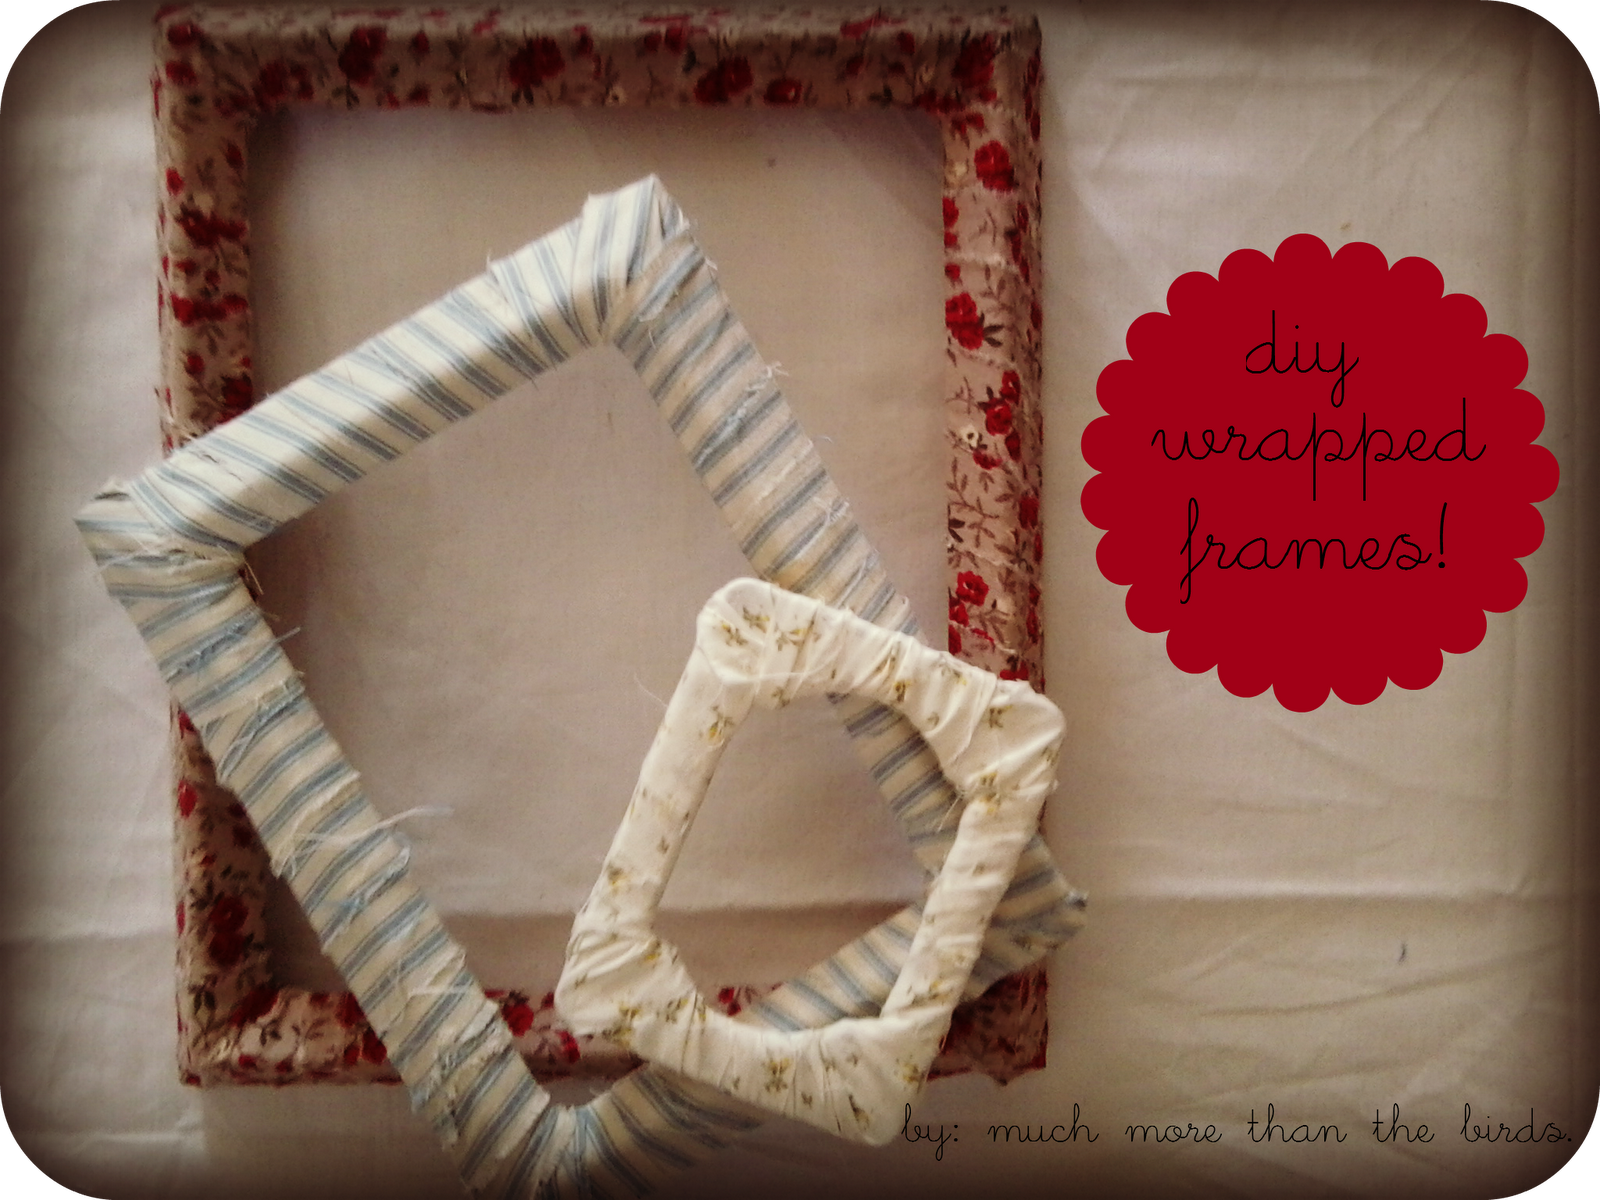 much more than the birds: diy fabric wrapped frames